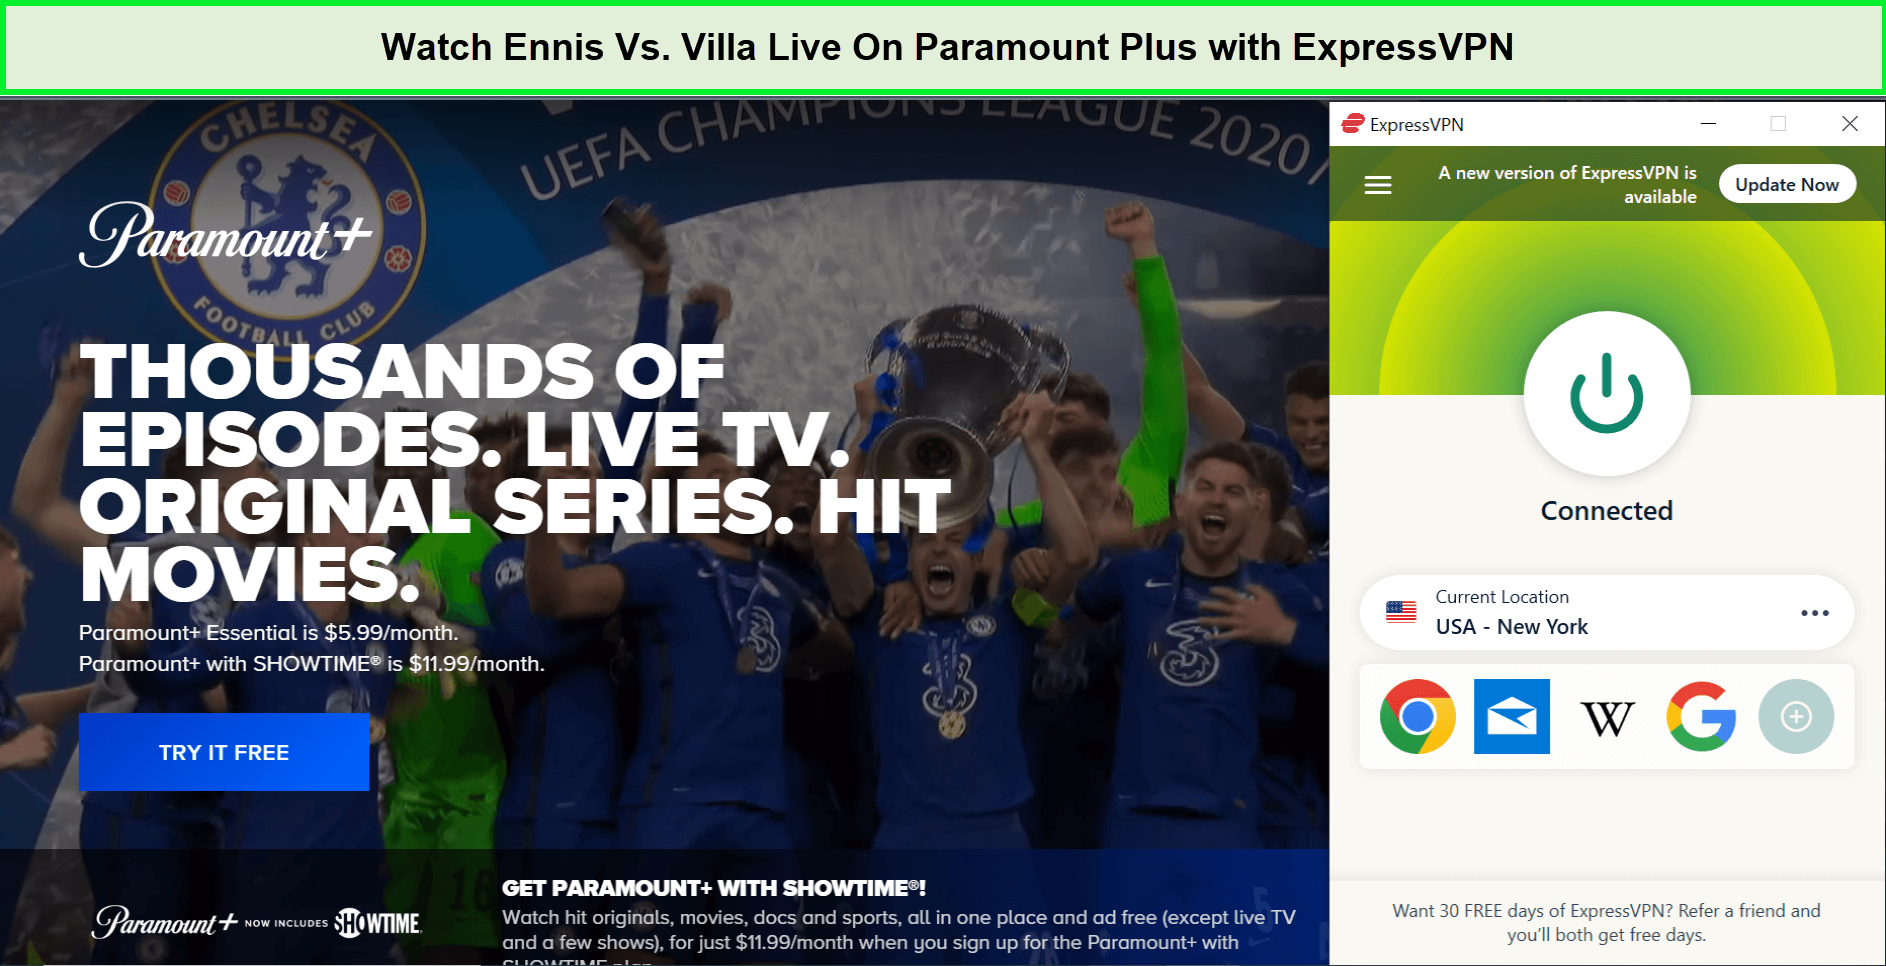 Watch-Ennis-Vs.-Villa-Live-in-India-On-Paramount-Plus-with-ExpressVPN